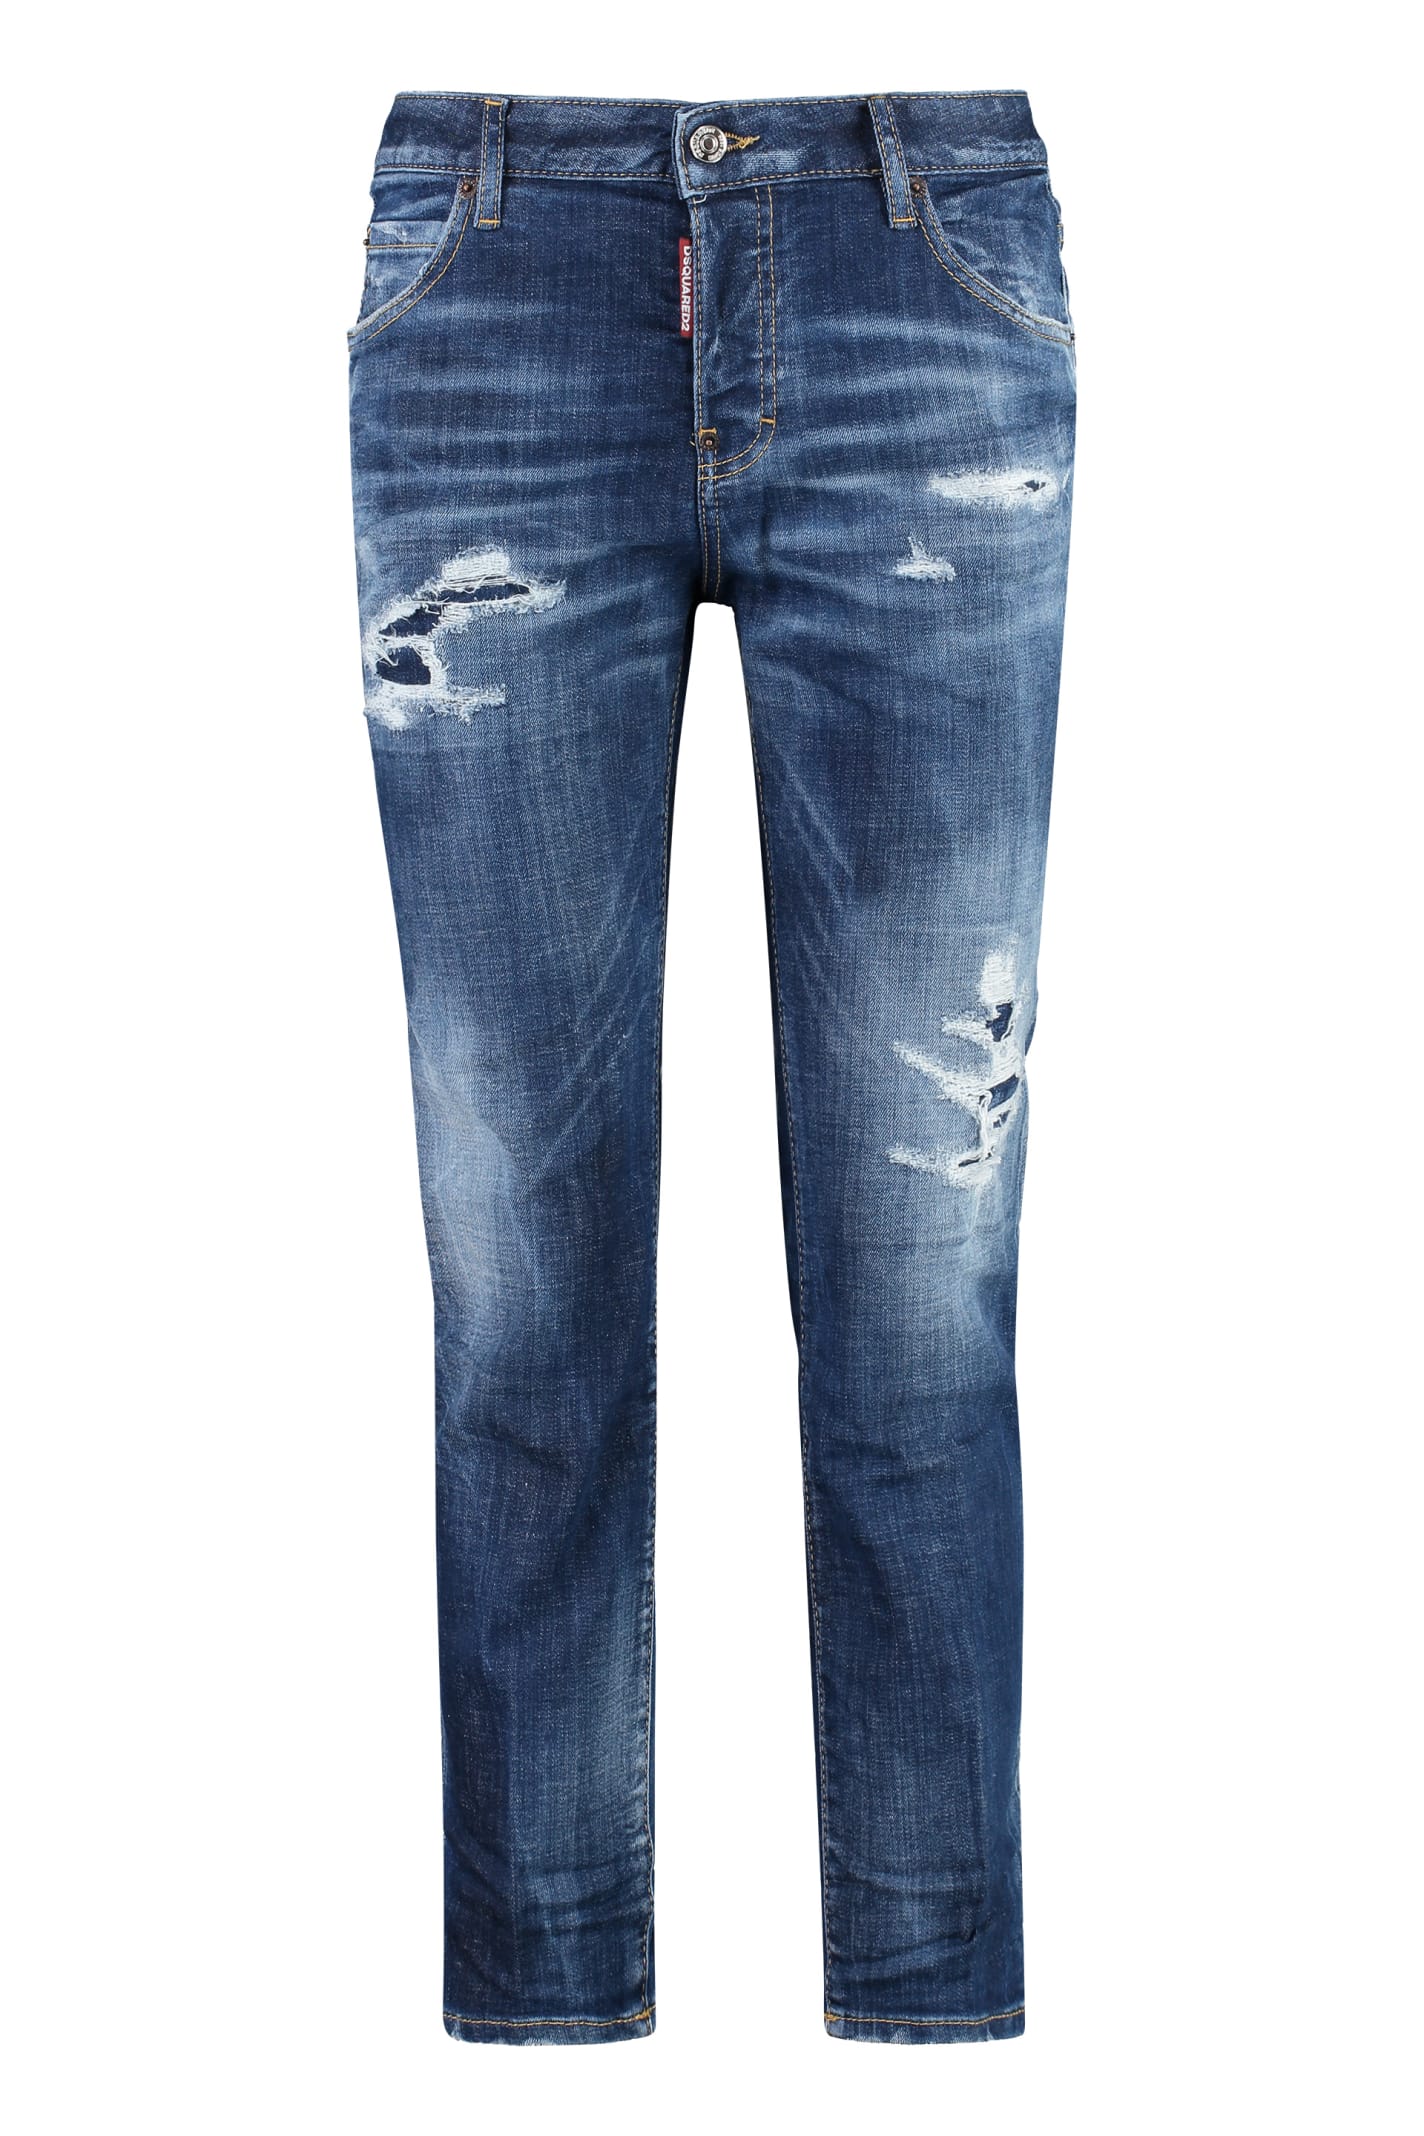 DSQUARED2 COOL GIRL STRAIGHT LEG JEANS